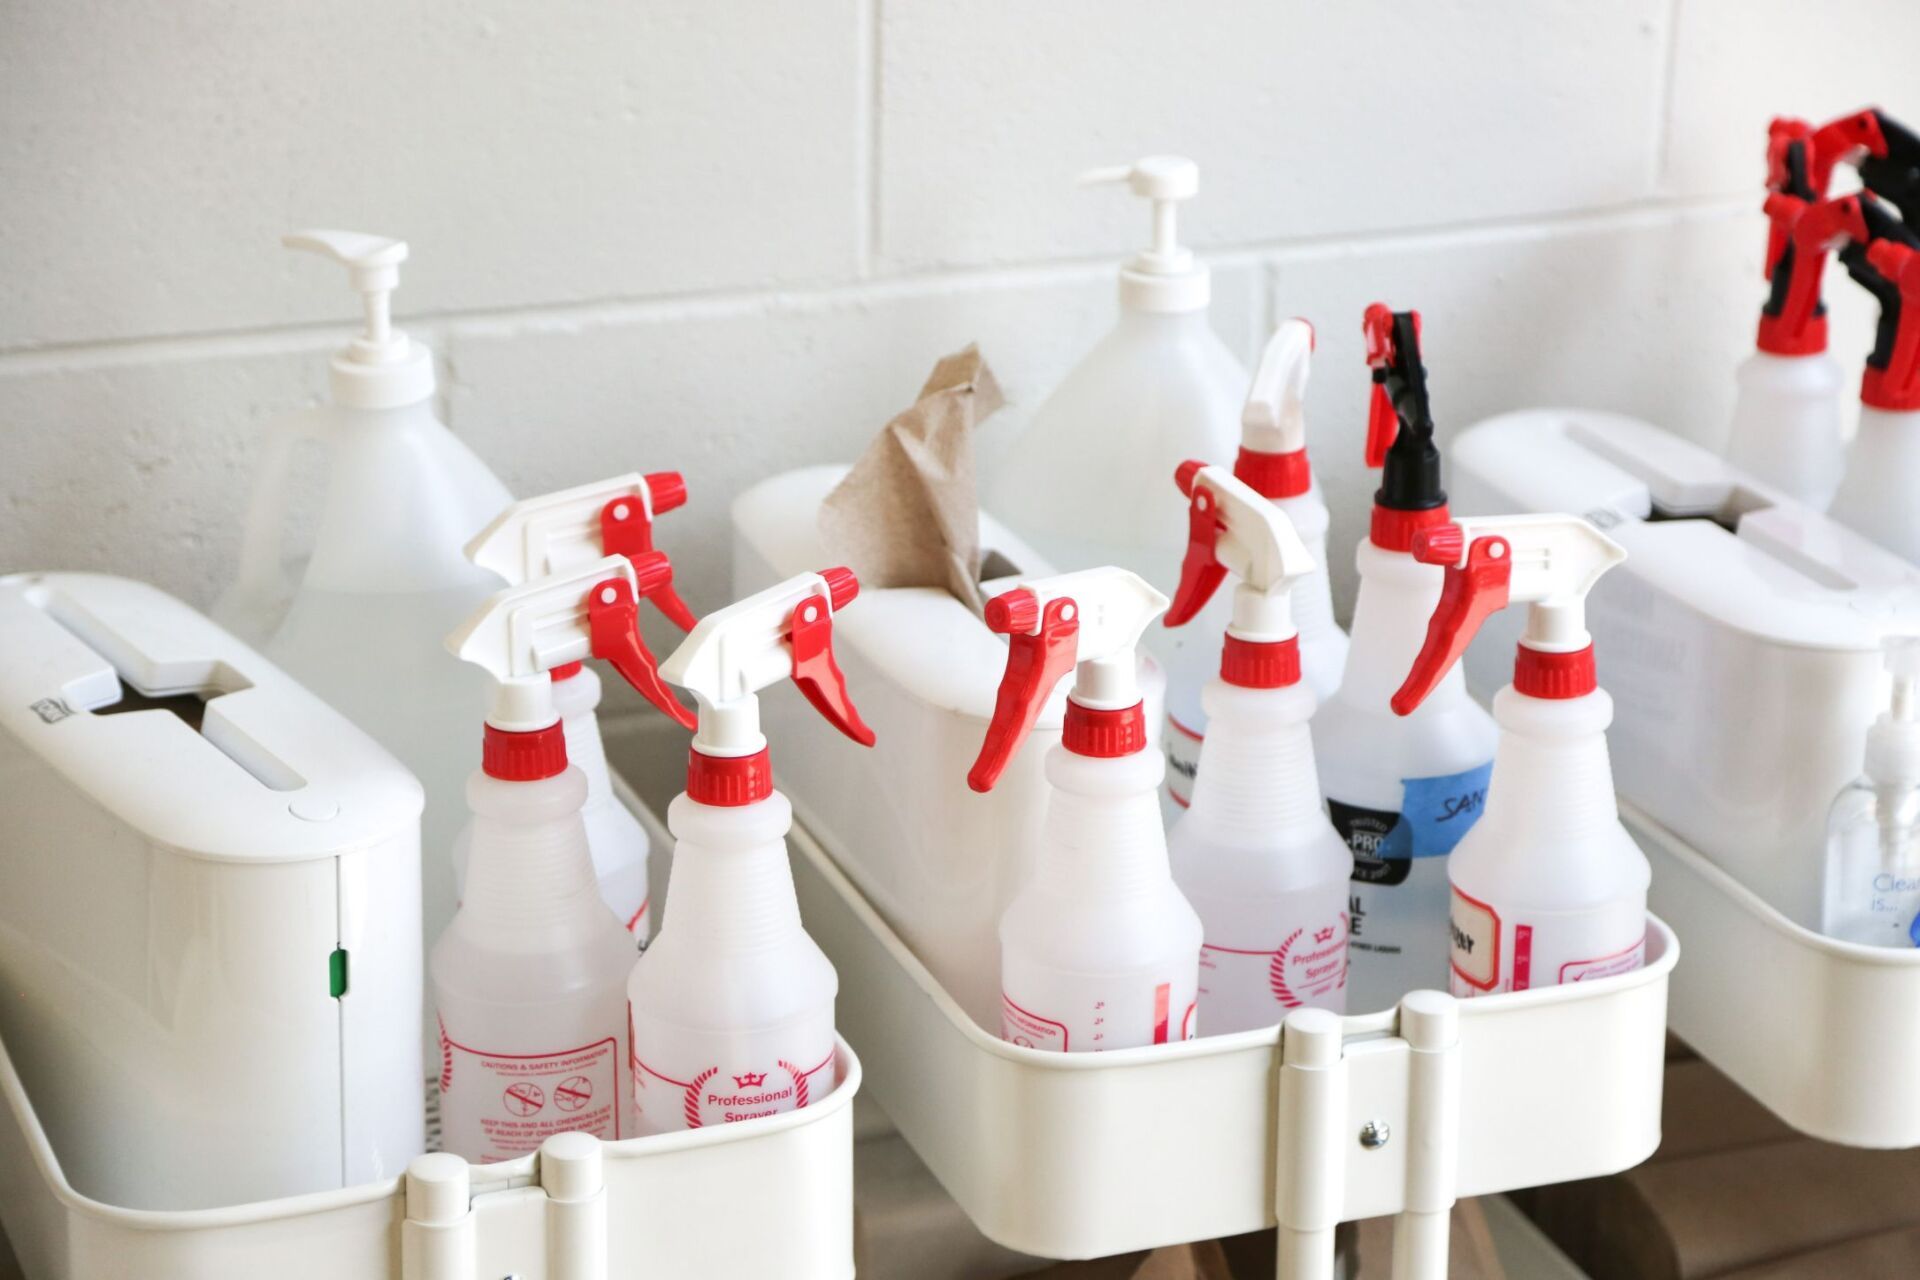 Spray Bottles — Cleaners In Mittagong, NSW